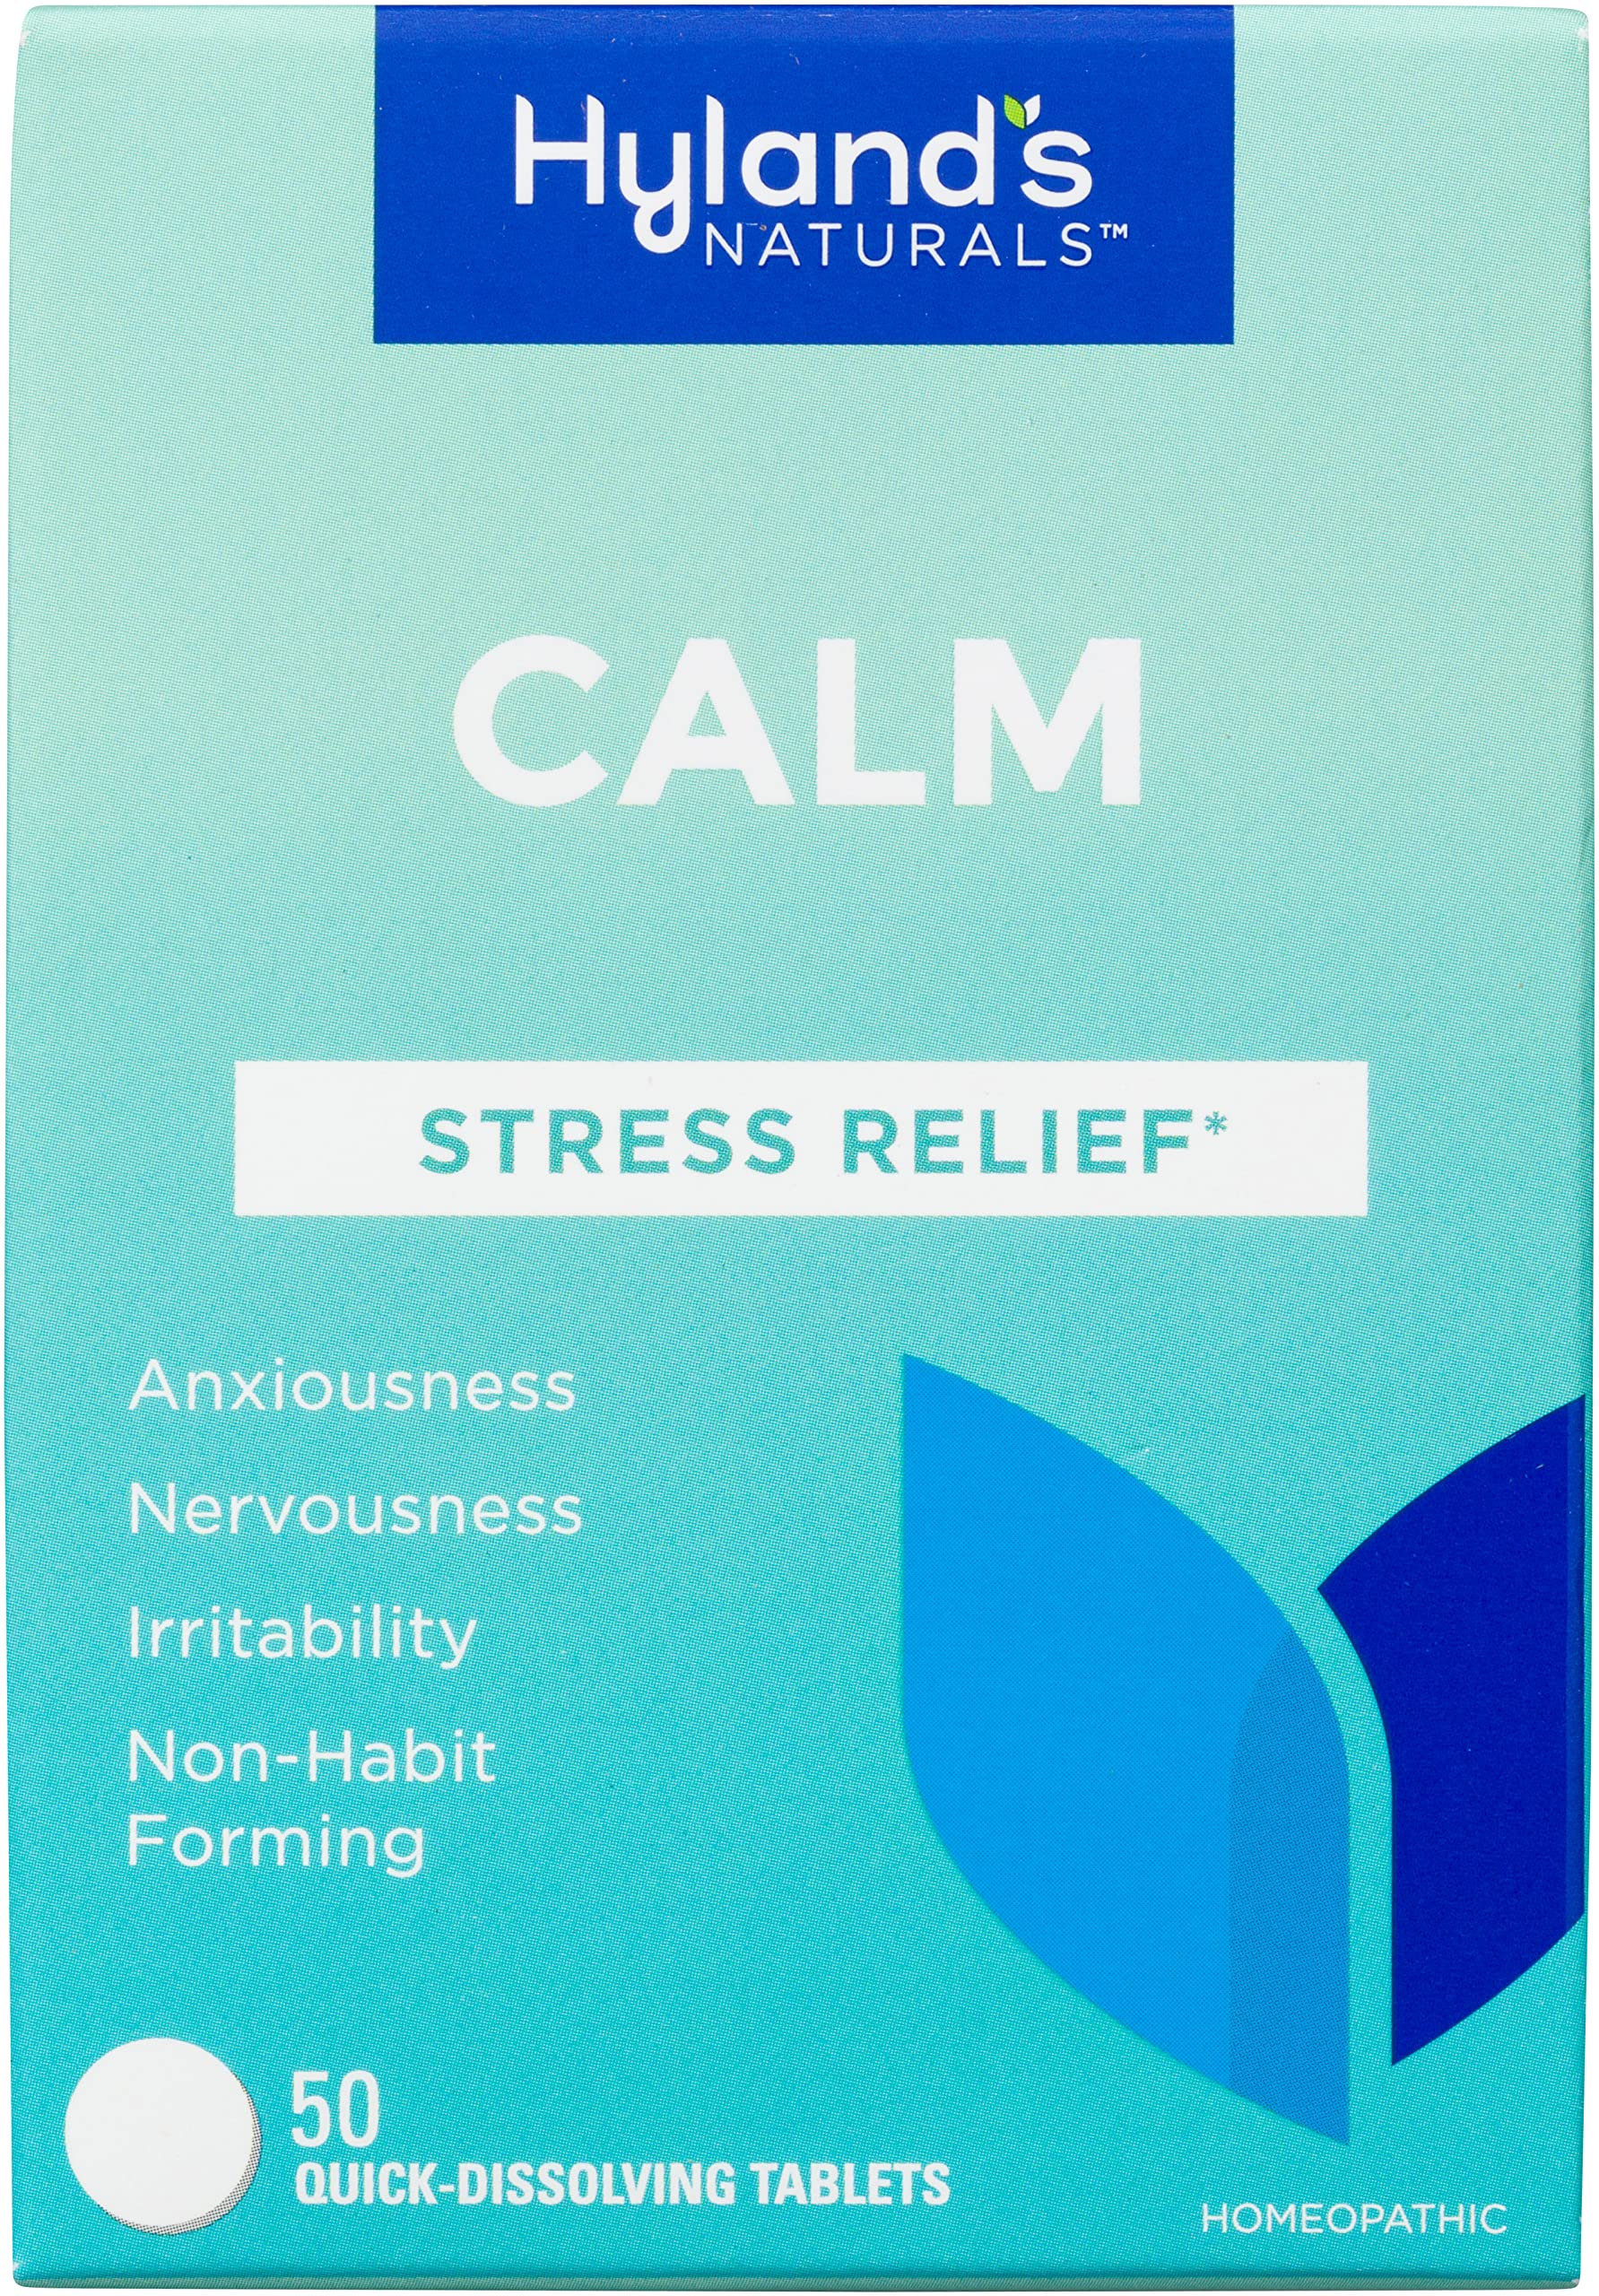 Hyland’s Naturals Calm Tablets, Stress Relief Supplement, Natural Relief Of Anxiousness, Nervousness, And Irritability, 50 Count